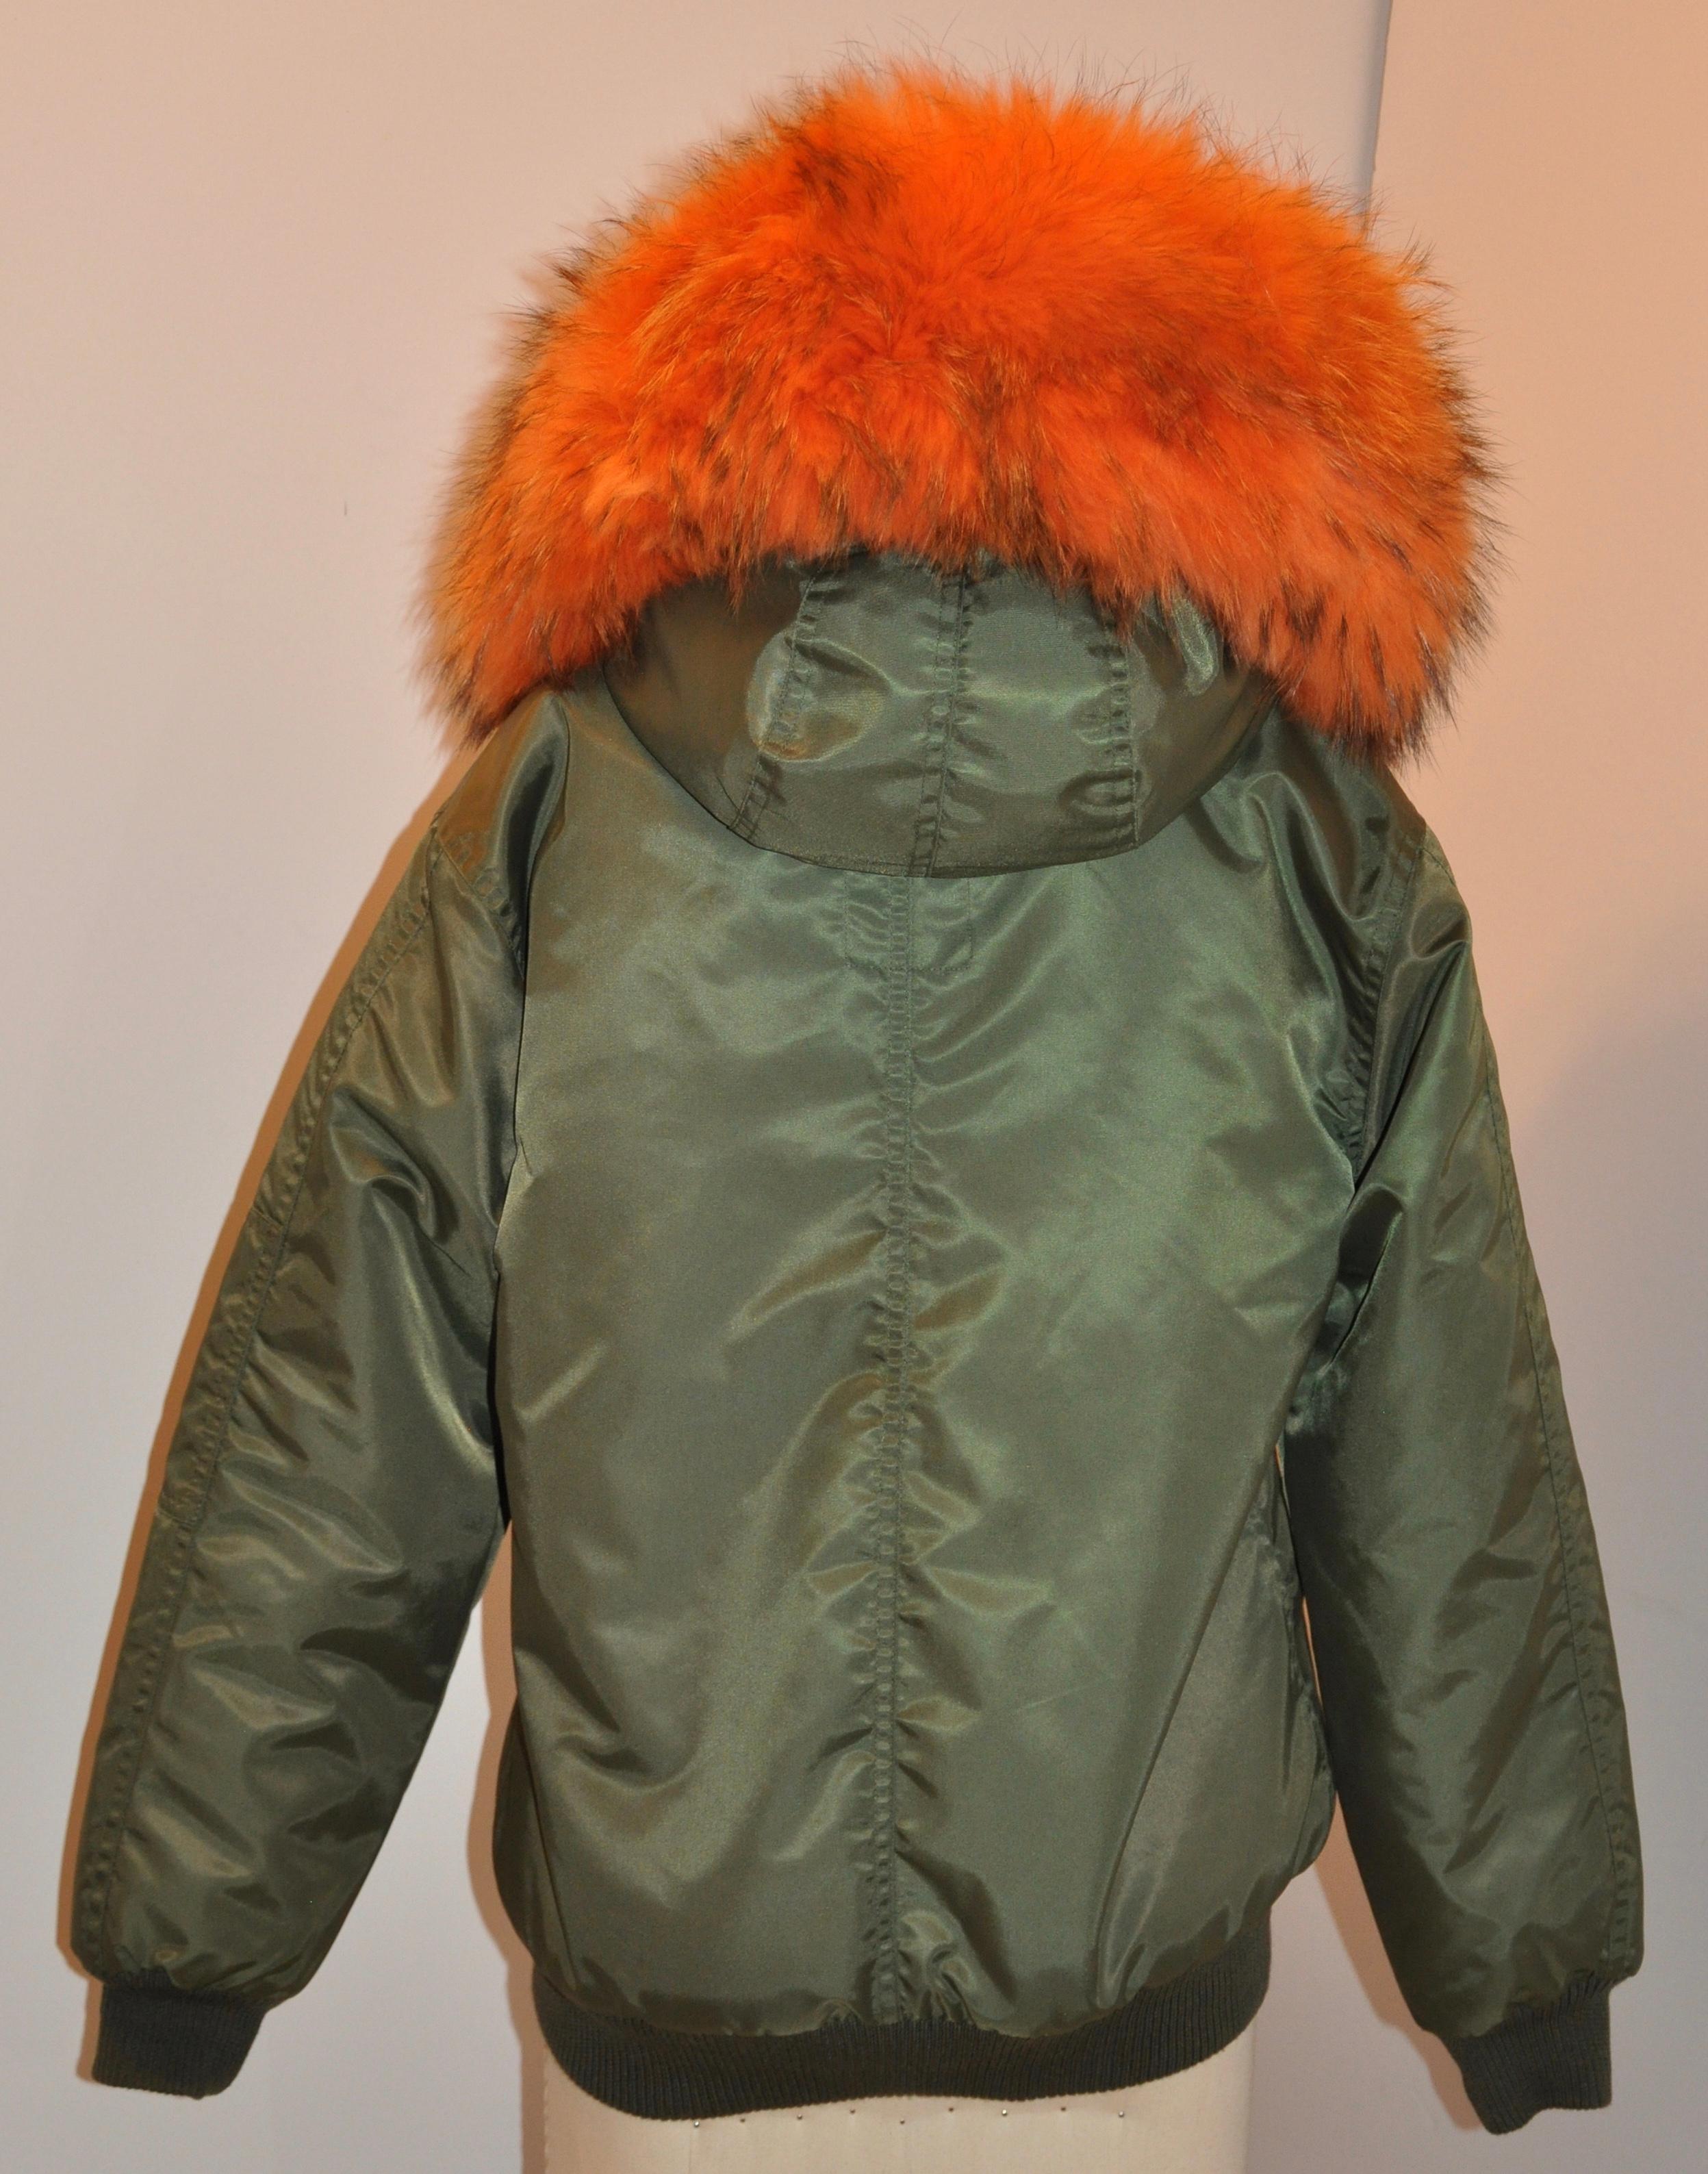 Olive Green Fully Lined with Tangerine Fox and Sheared Mink Hooded Zipper Jacket For Sale 8